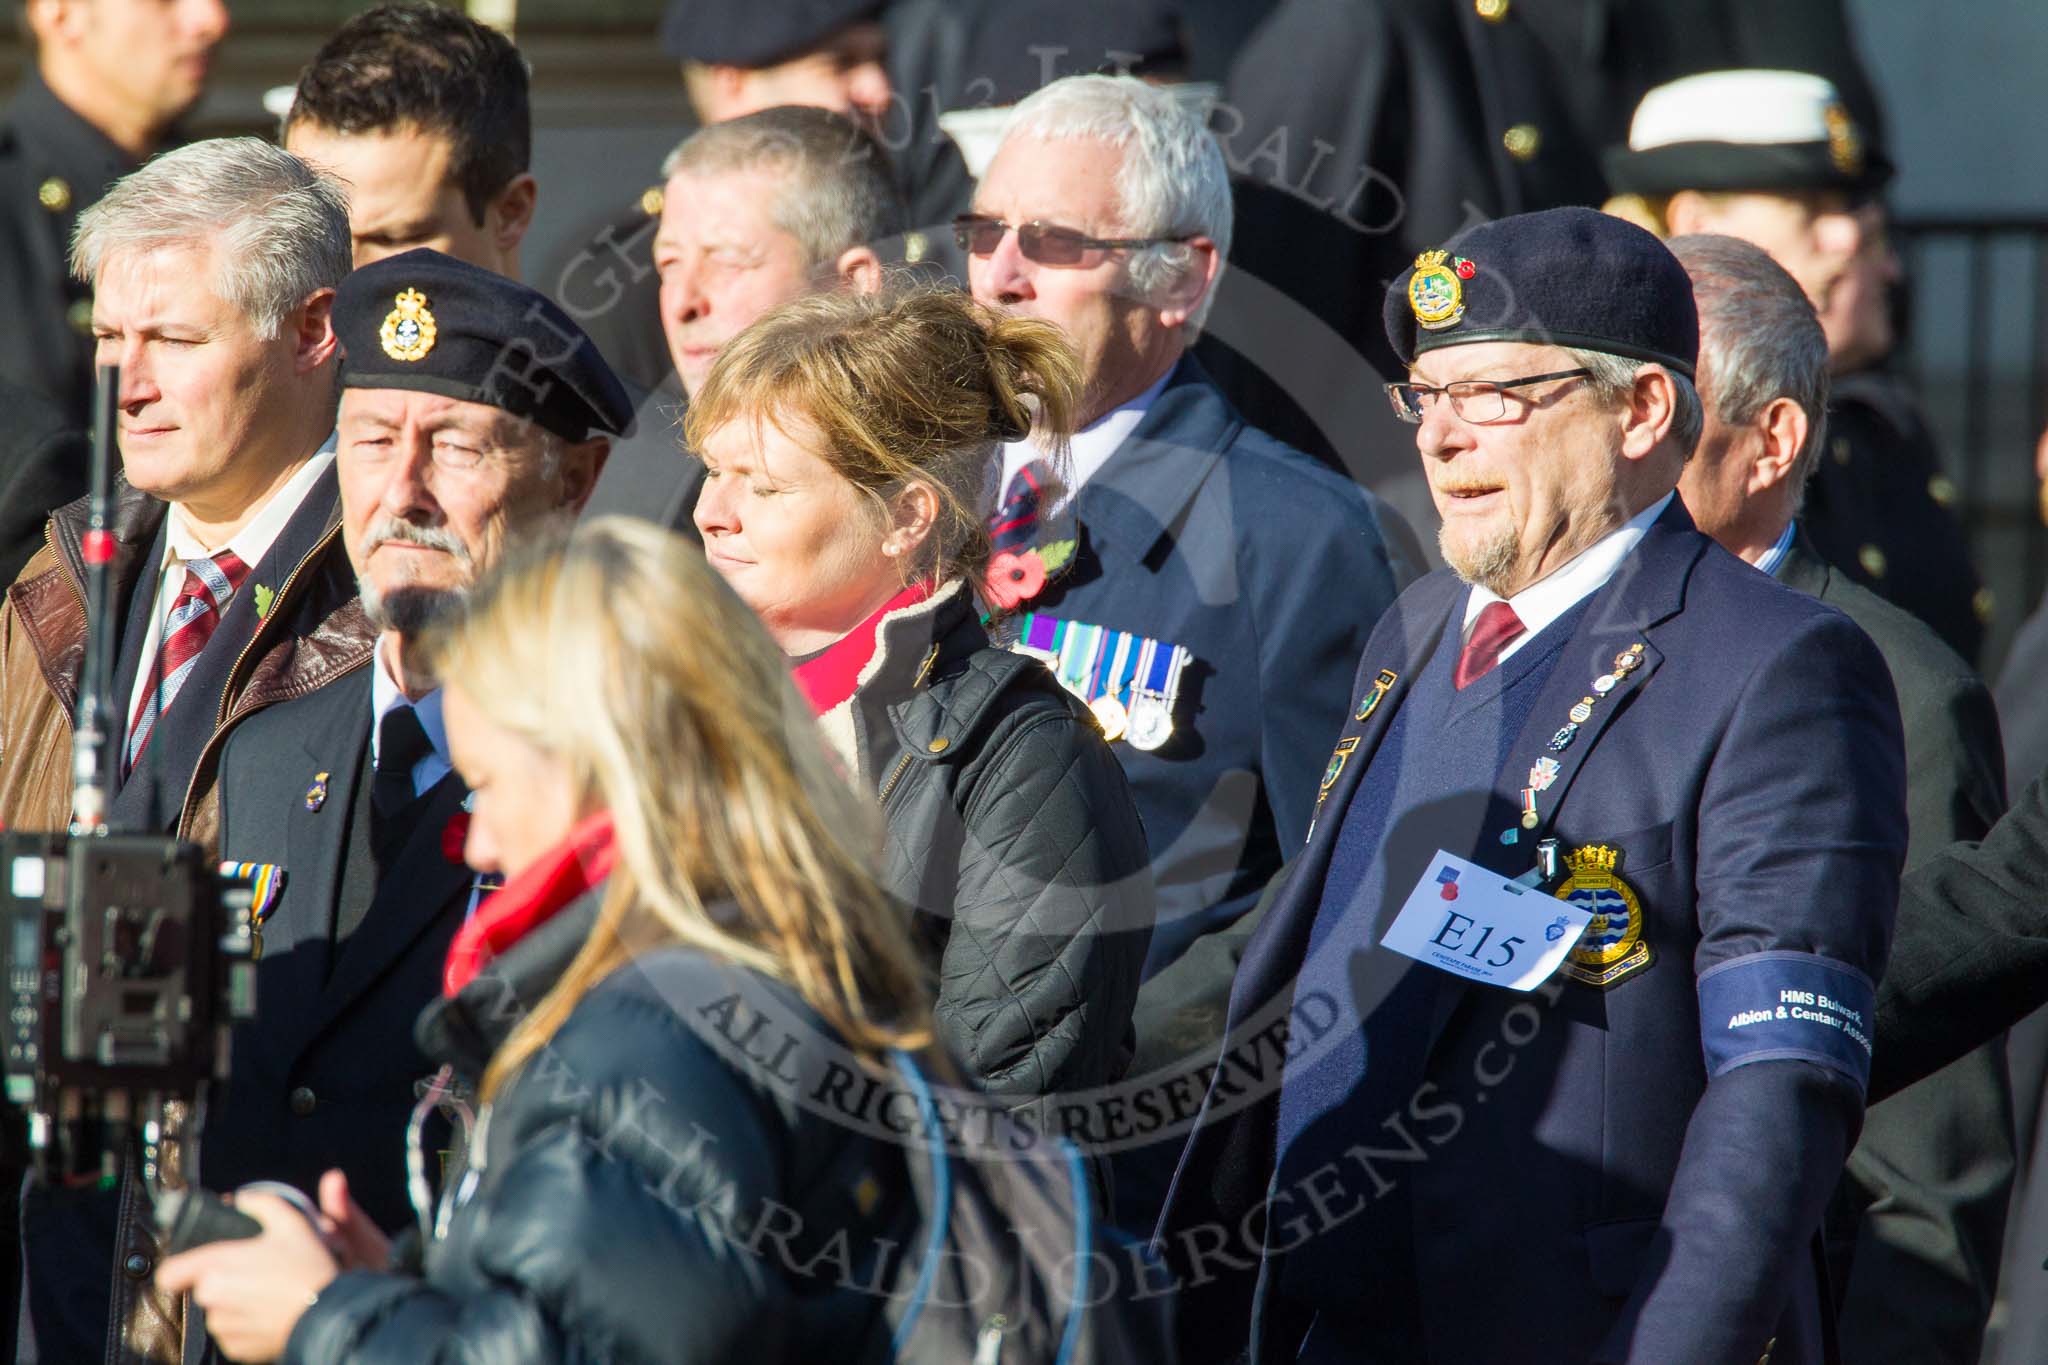 Remembrance Sunday at the Cenotaph in London 2014: E15 - HMS Bulwark, Albion & Centaur Association.
Press stand opposite the Foreign Office building, Whitehall, London SW1,
London,
Greater London,
United Kingdom,
on 09 November 2014 at 11:51, image #685